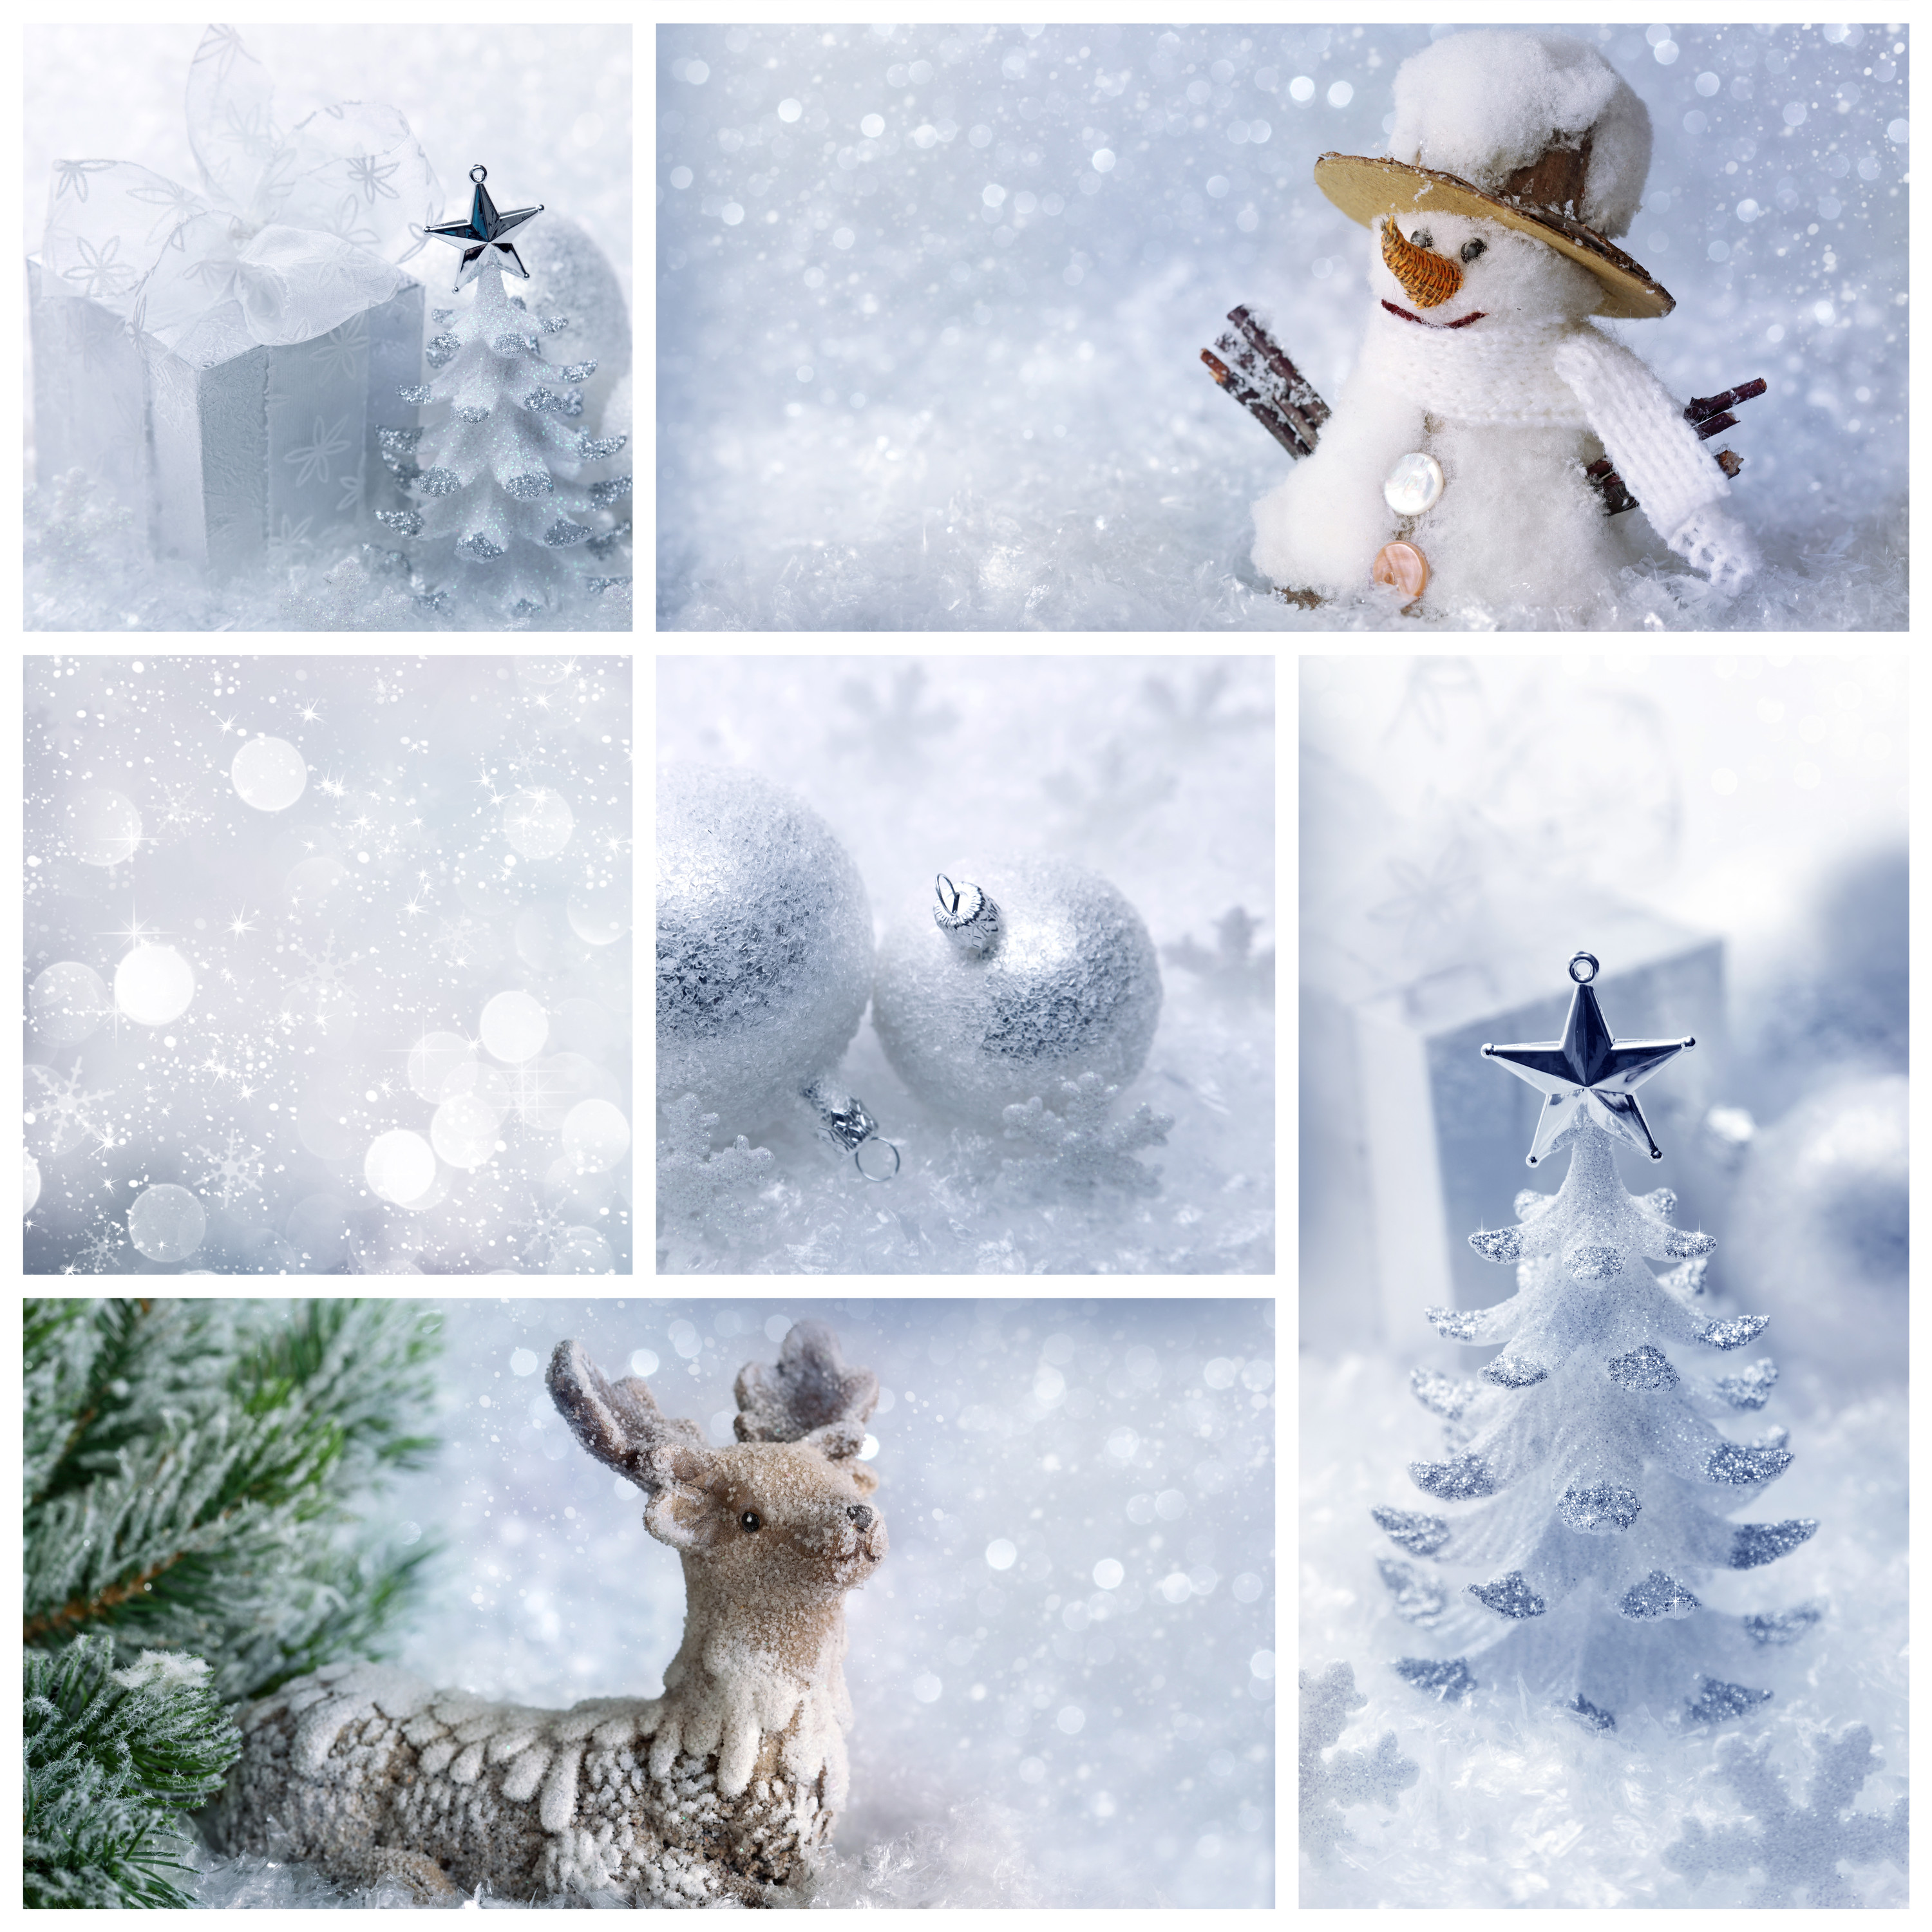 Christmas images 2015